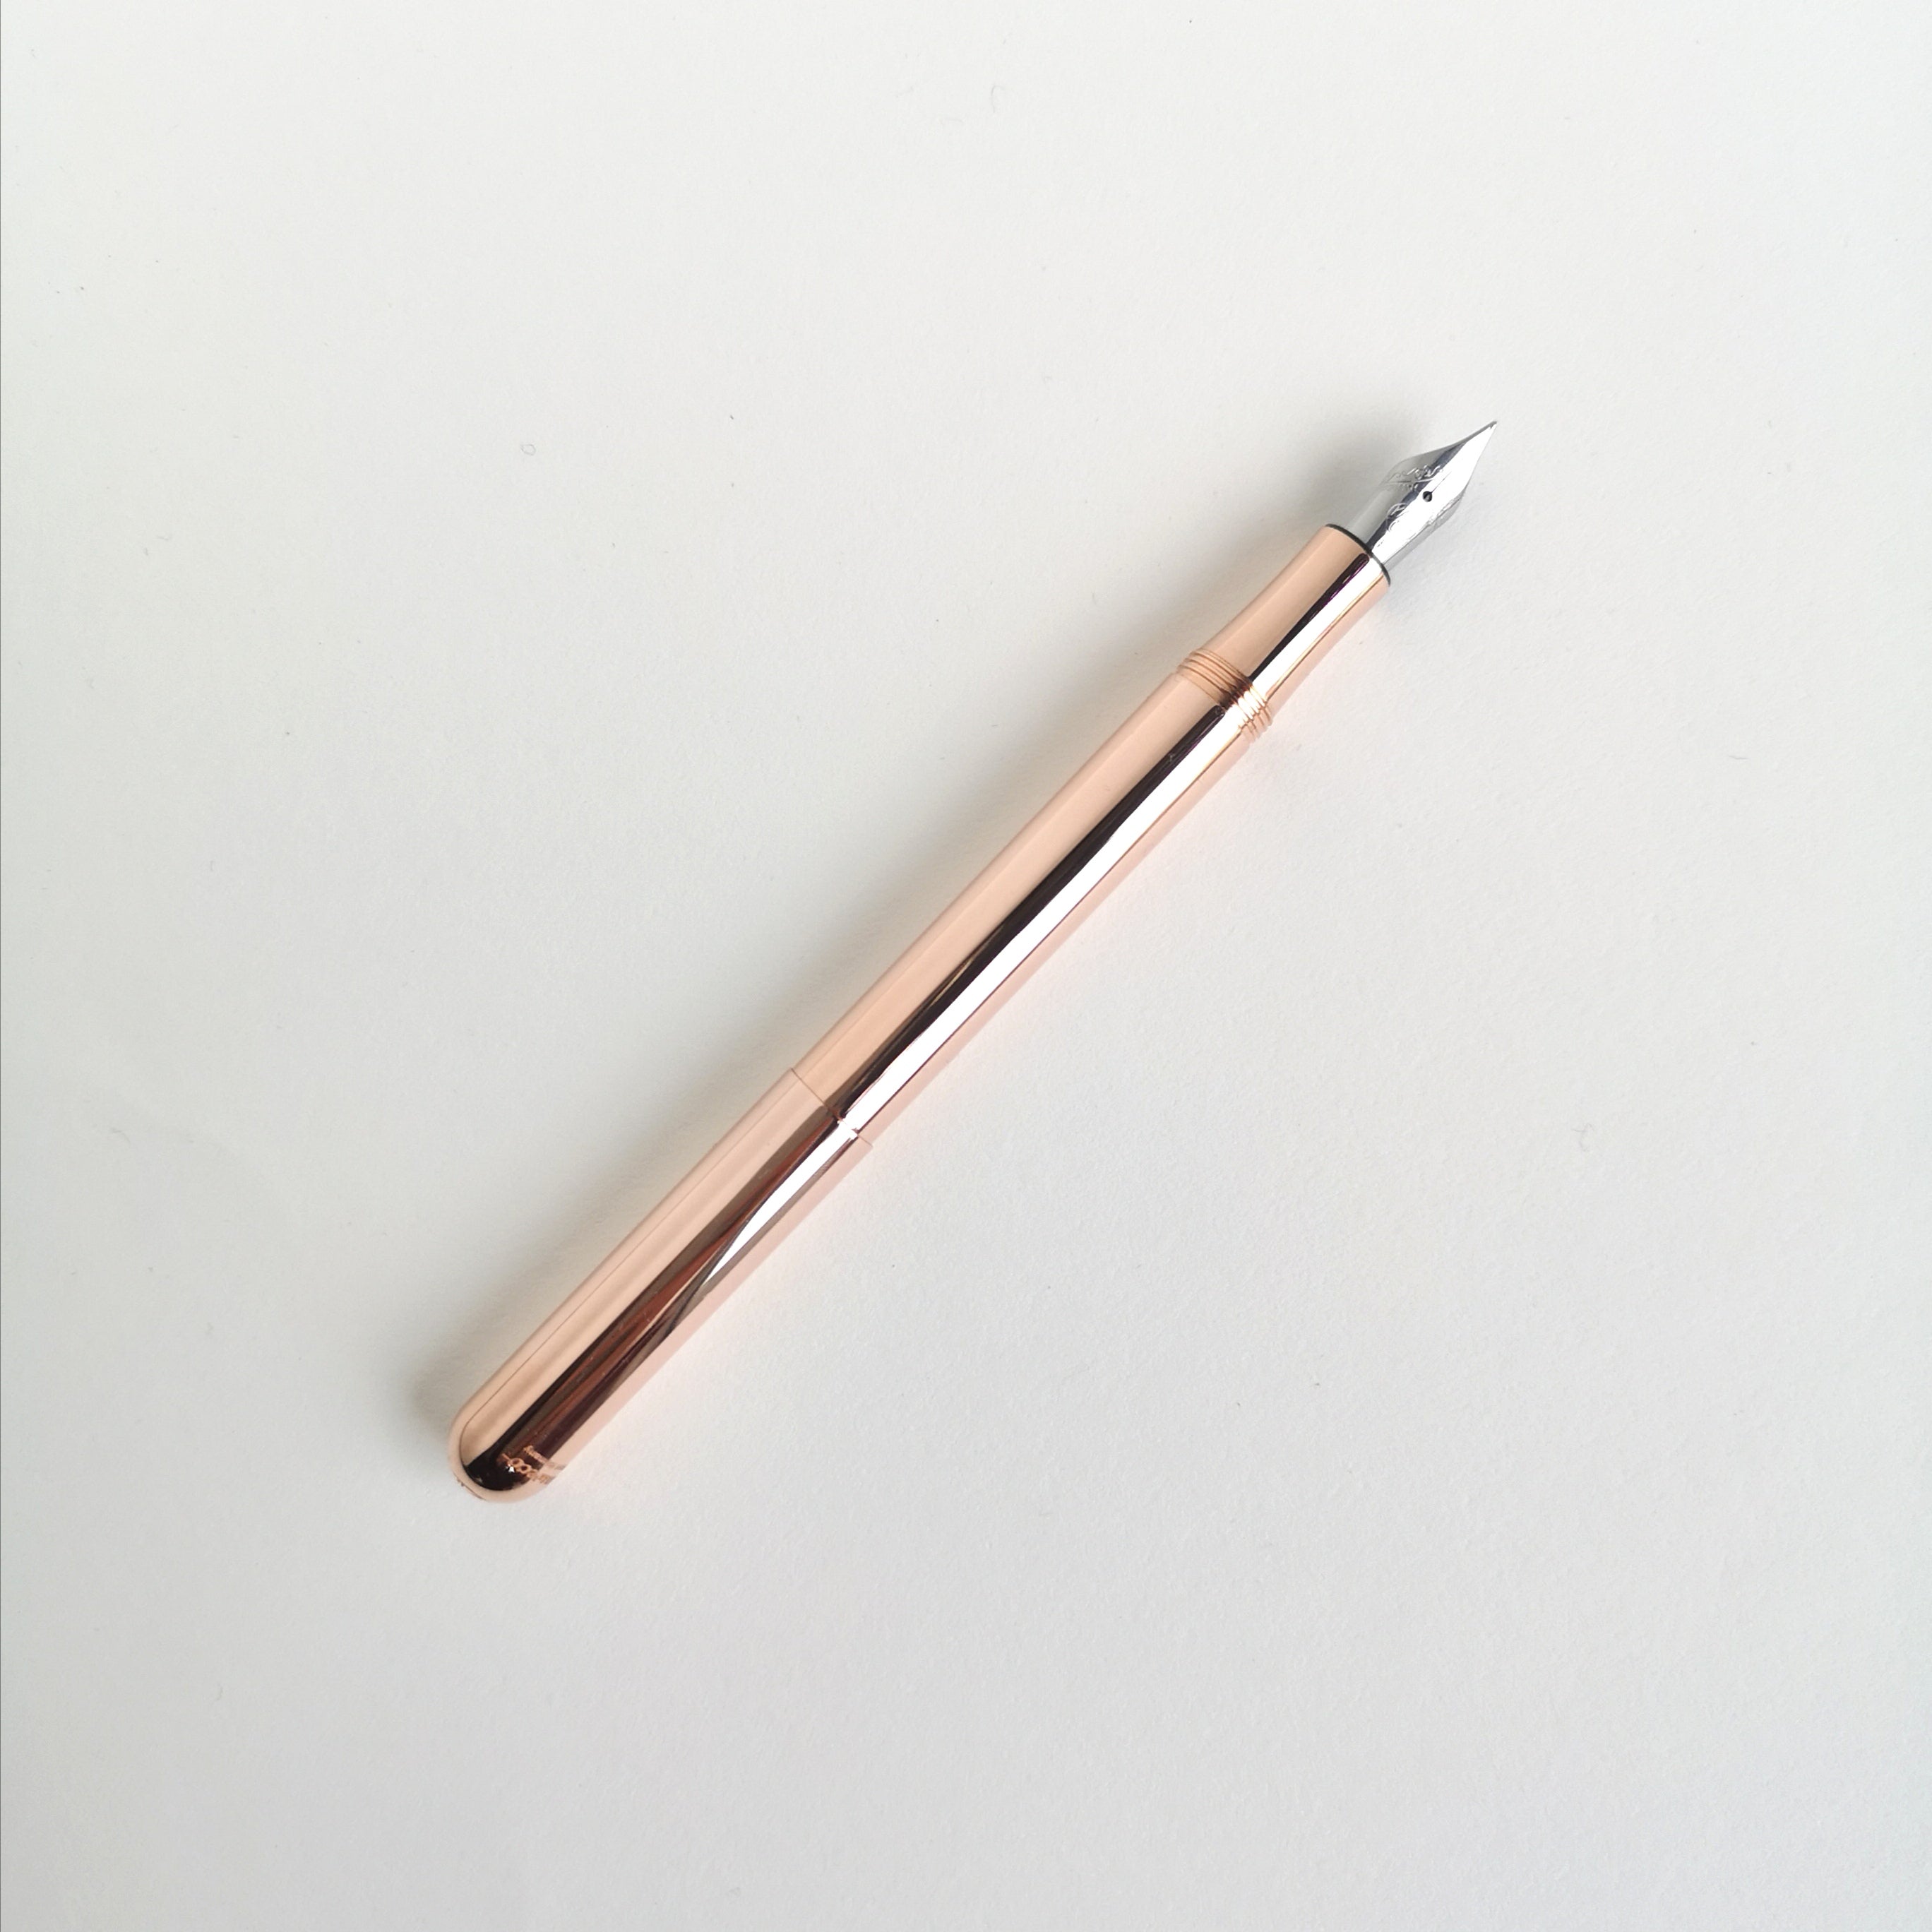 Kaweco Copper Liliput Fountain Pen with cap posted